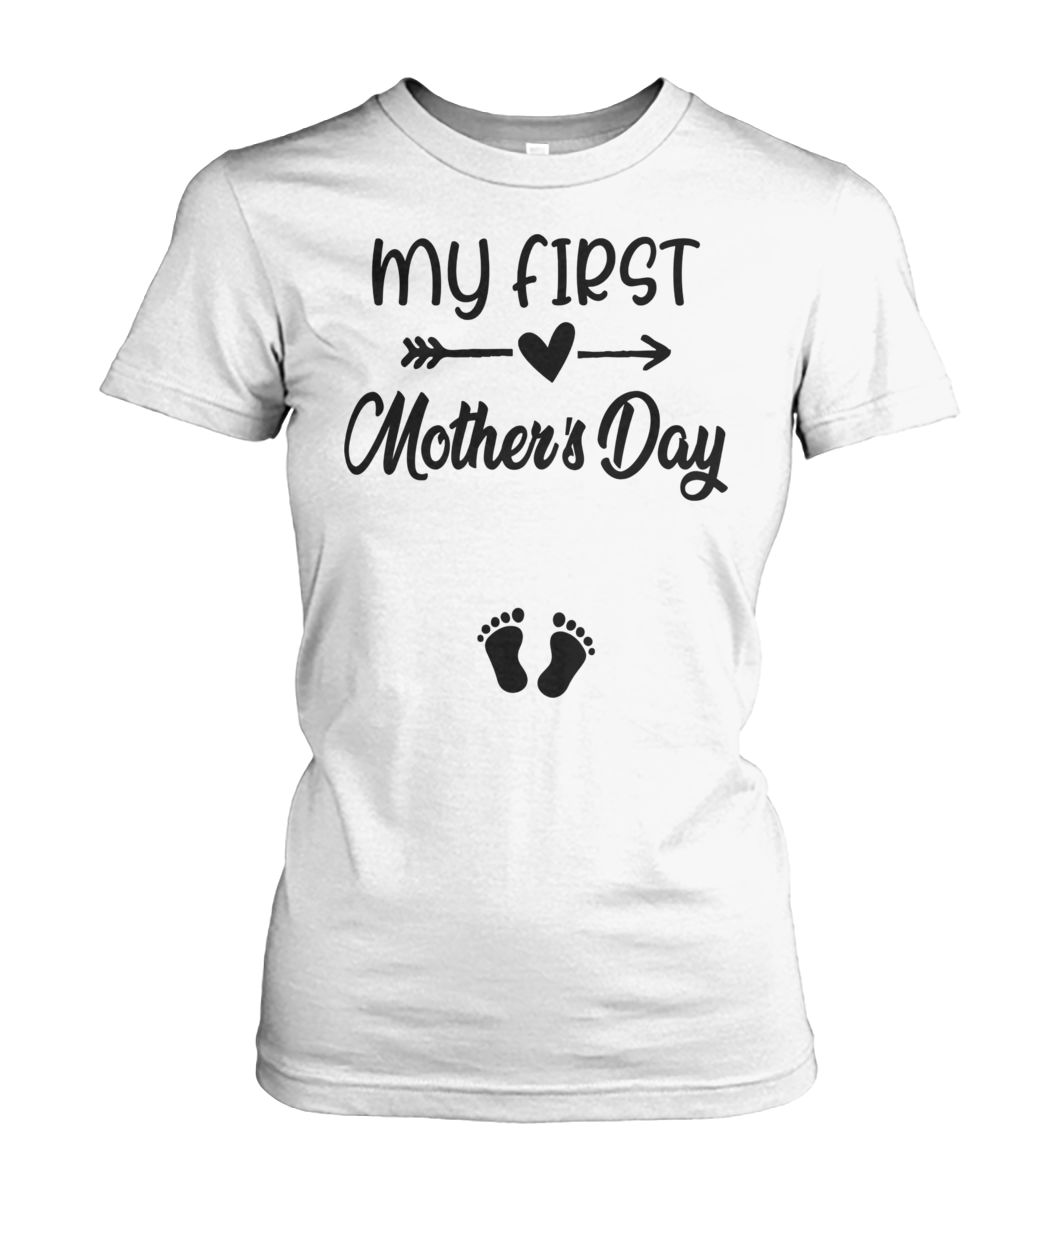 My first mother's day pregnancy announcement women's crew tee